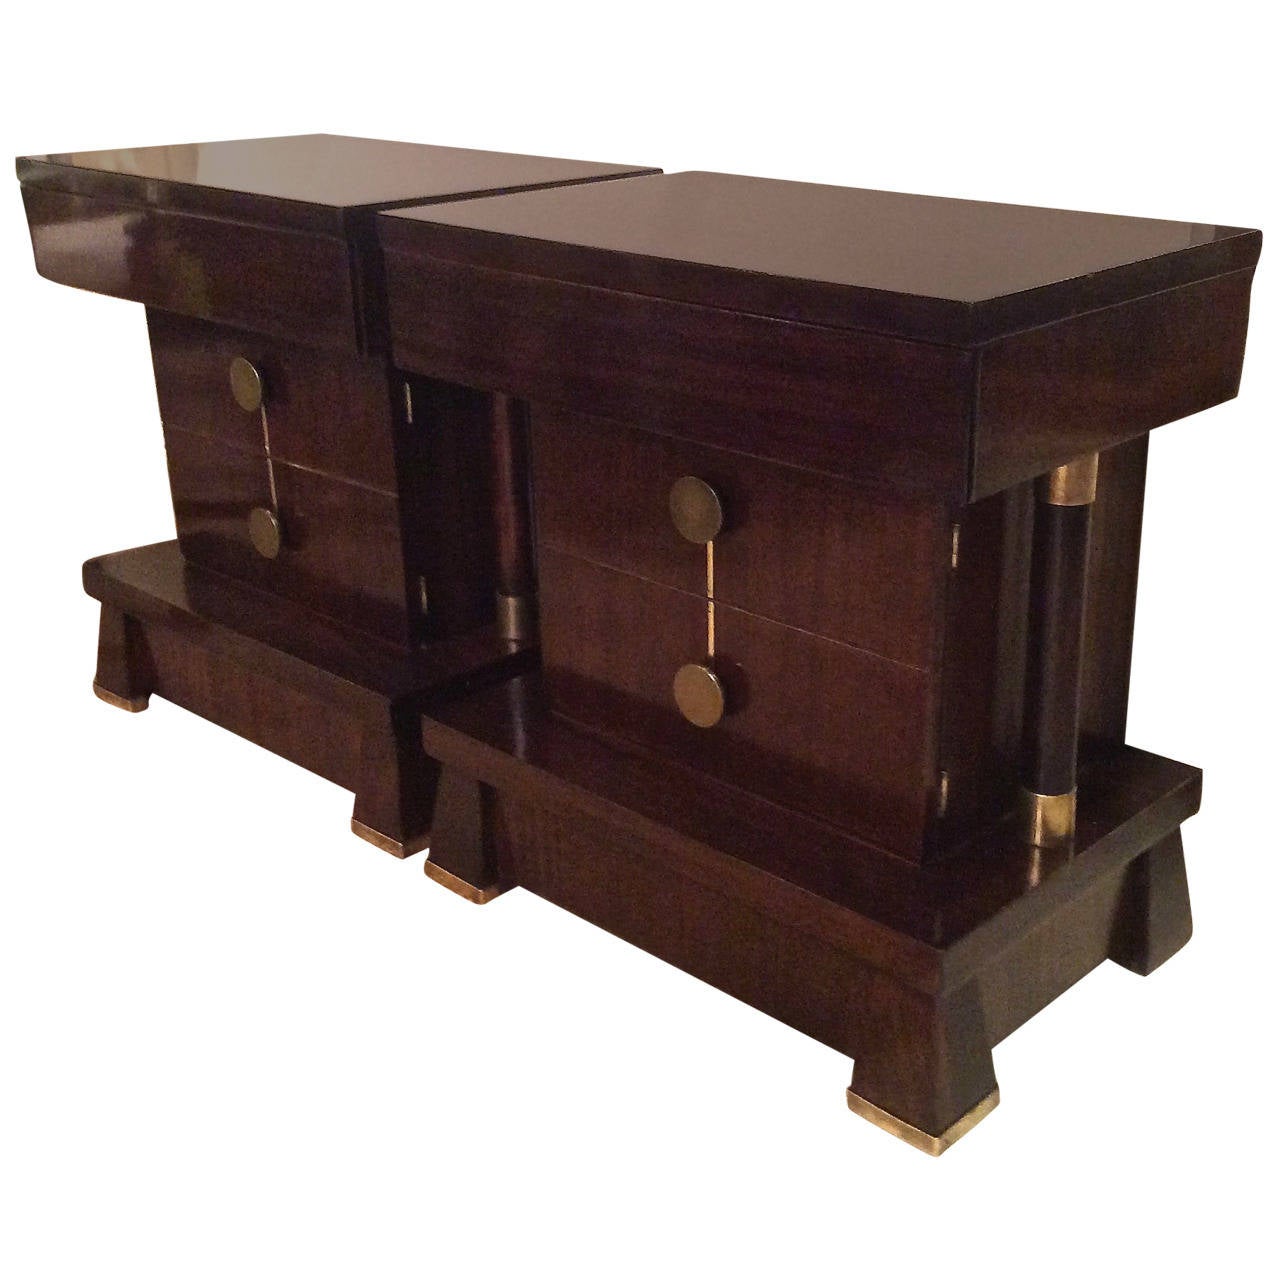 Fabulous pair of Art Deco mahogany nightstands or side tables with columnar mahogany support on either side. Table doors open to reveal an inner shelf. Stunning brass details adorn the plinth feet, doors and pulls. Professionally hand polished.